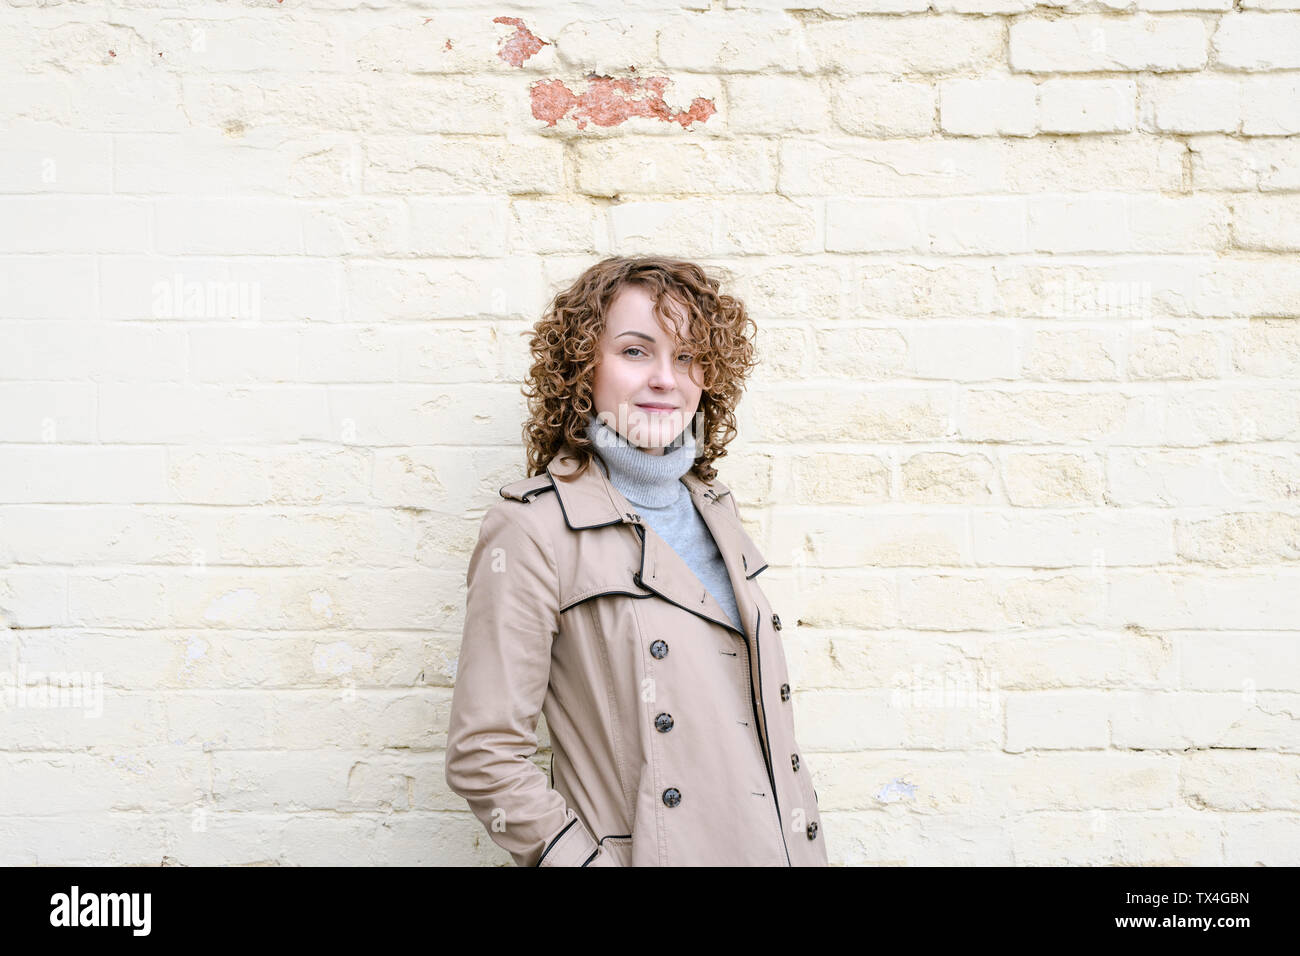 Portrait of smiling woman with curly hair wearing beige trenchcoat Stock Photo